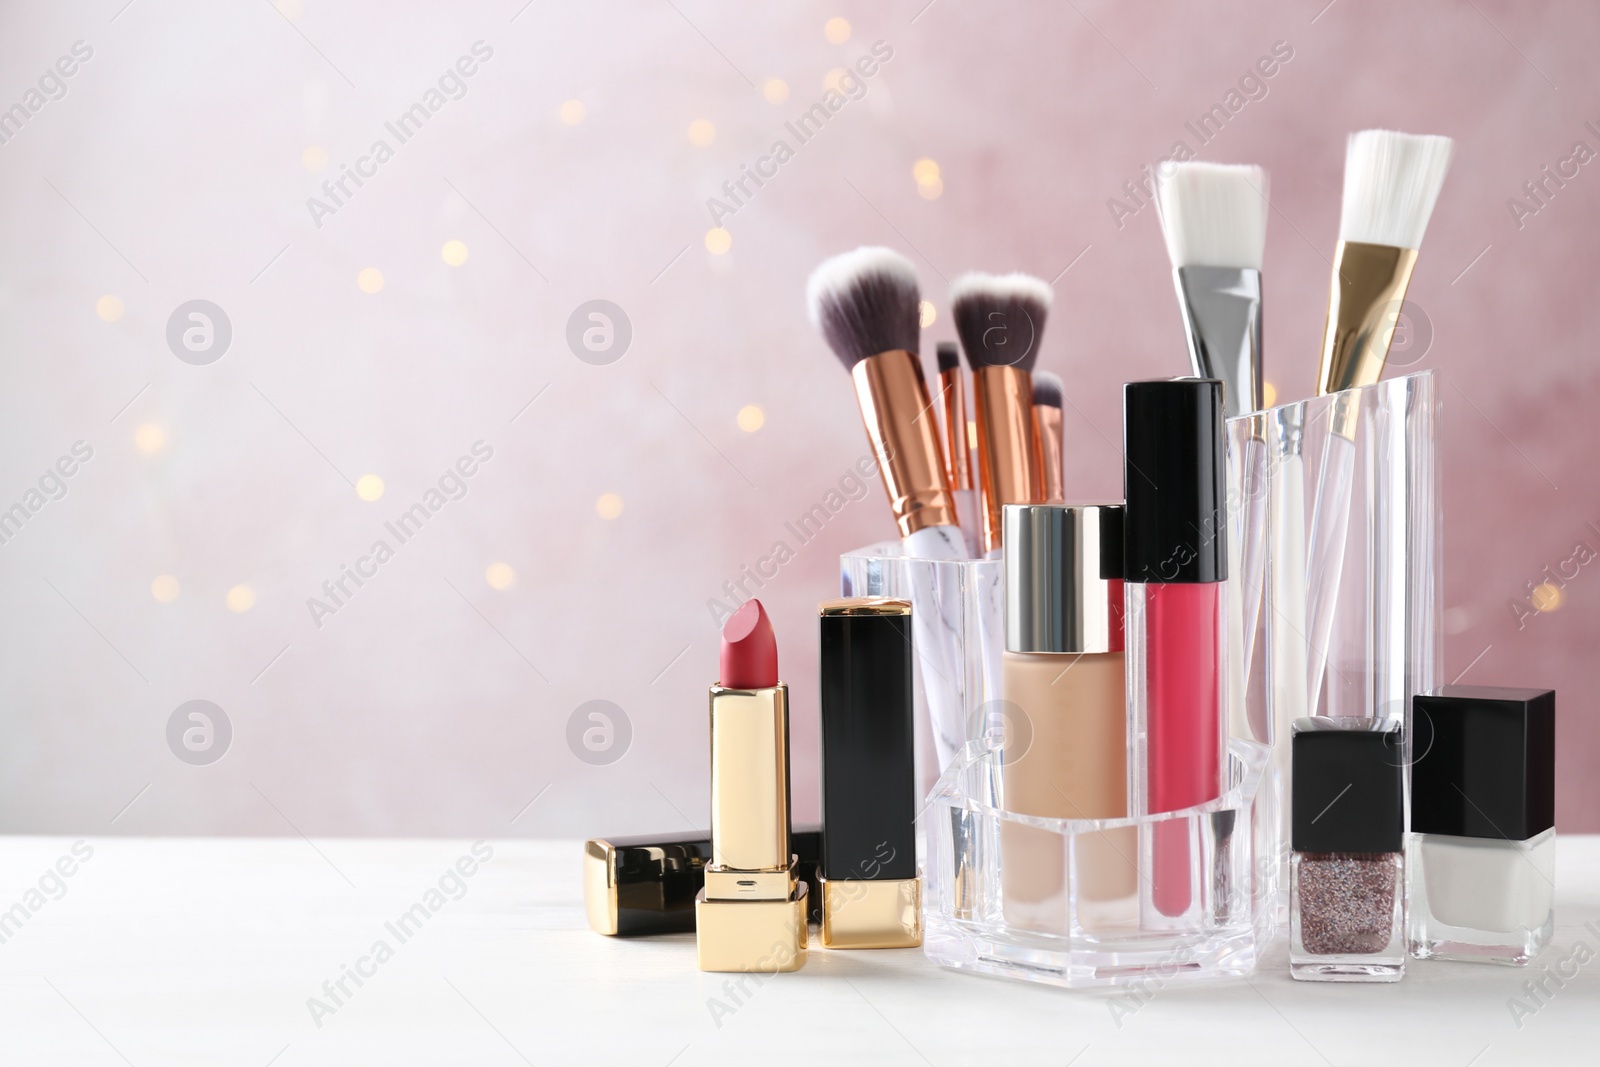 Photo of Makeup cosmetic products on white wooden table against pink background, space for text